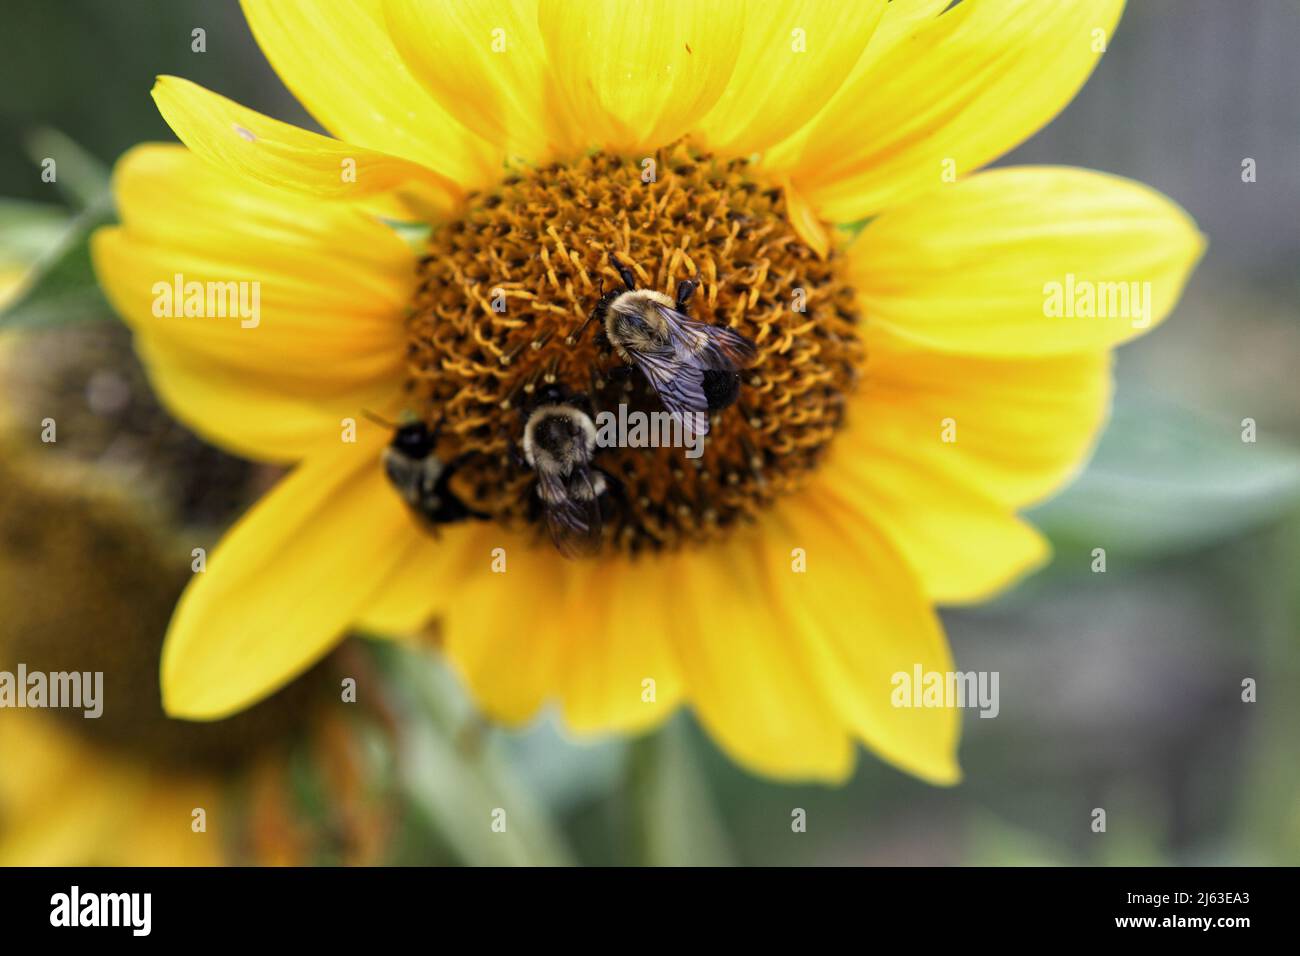 Three honeybees pollinate a yellow daisy, while working to gather pollen to make honey. Stock Photo